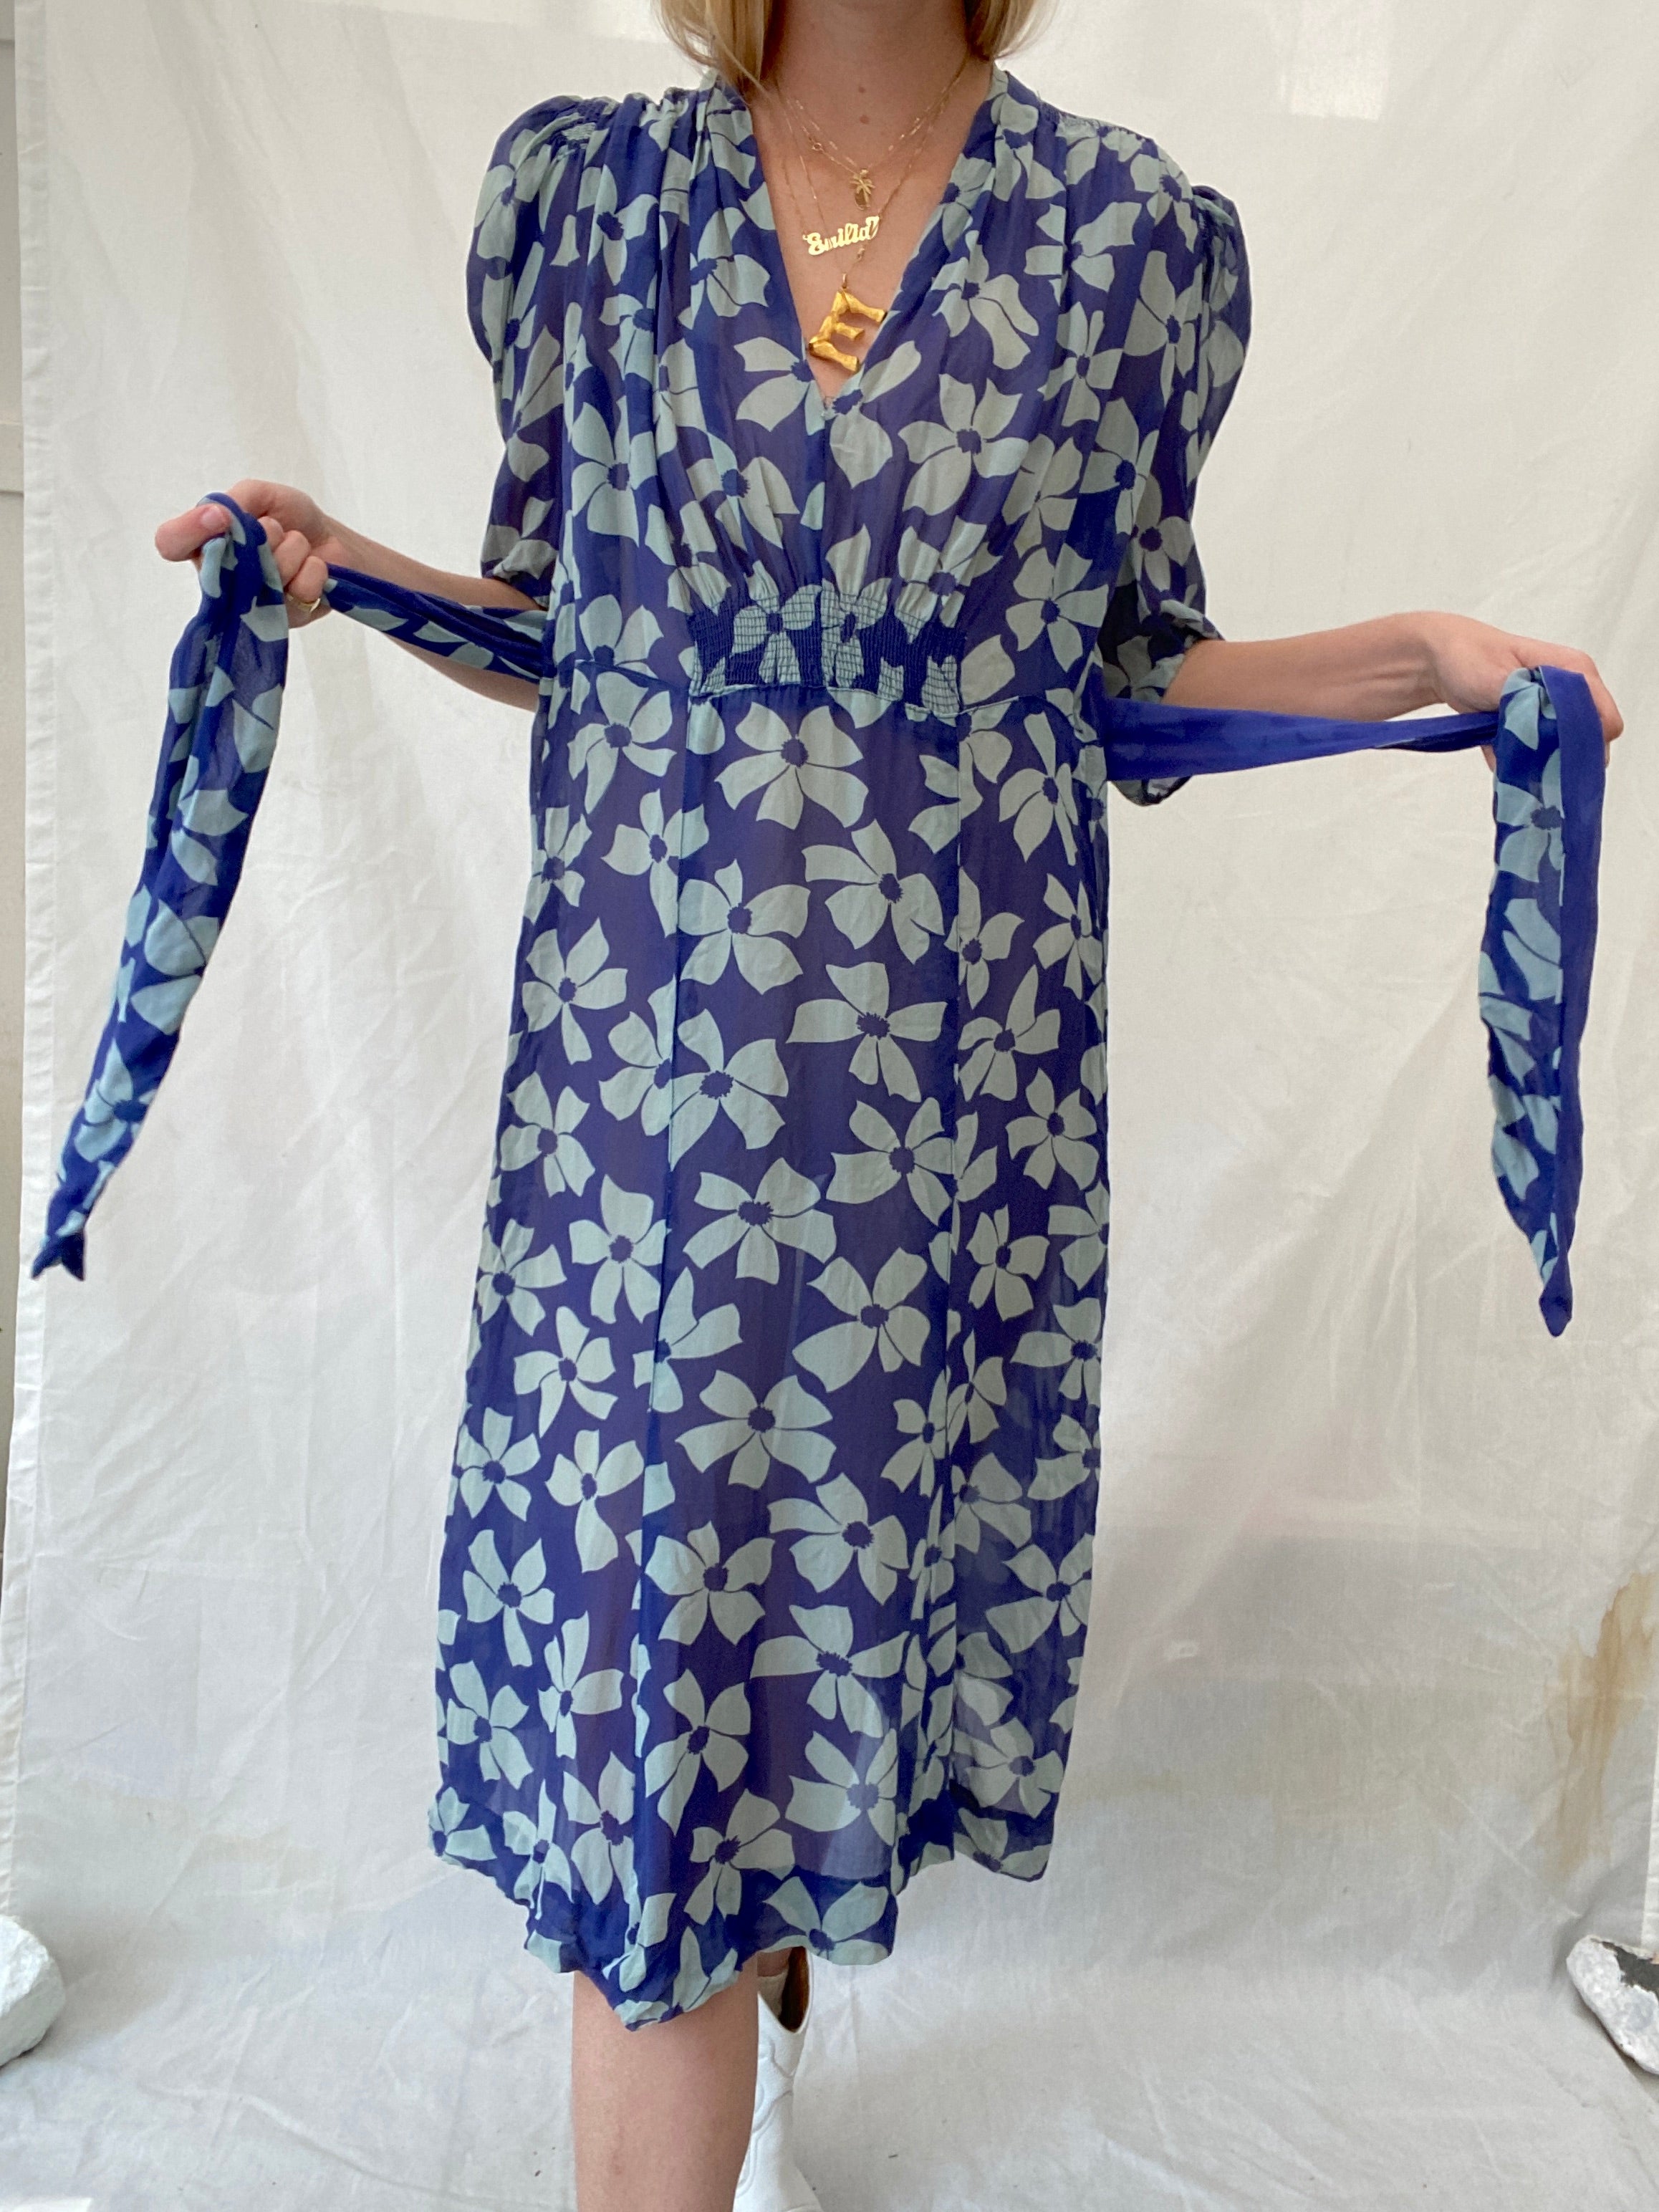 Blue Floral Print Chiffon Dress with Puffed Sleeves